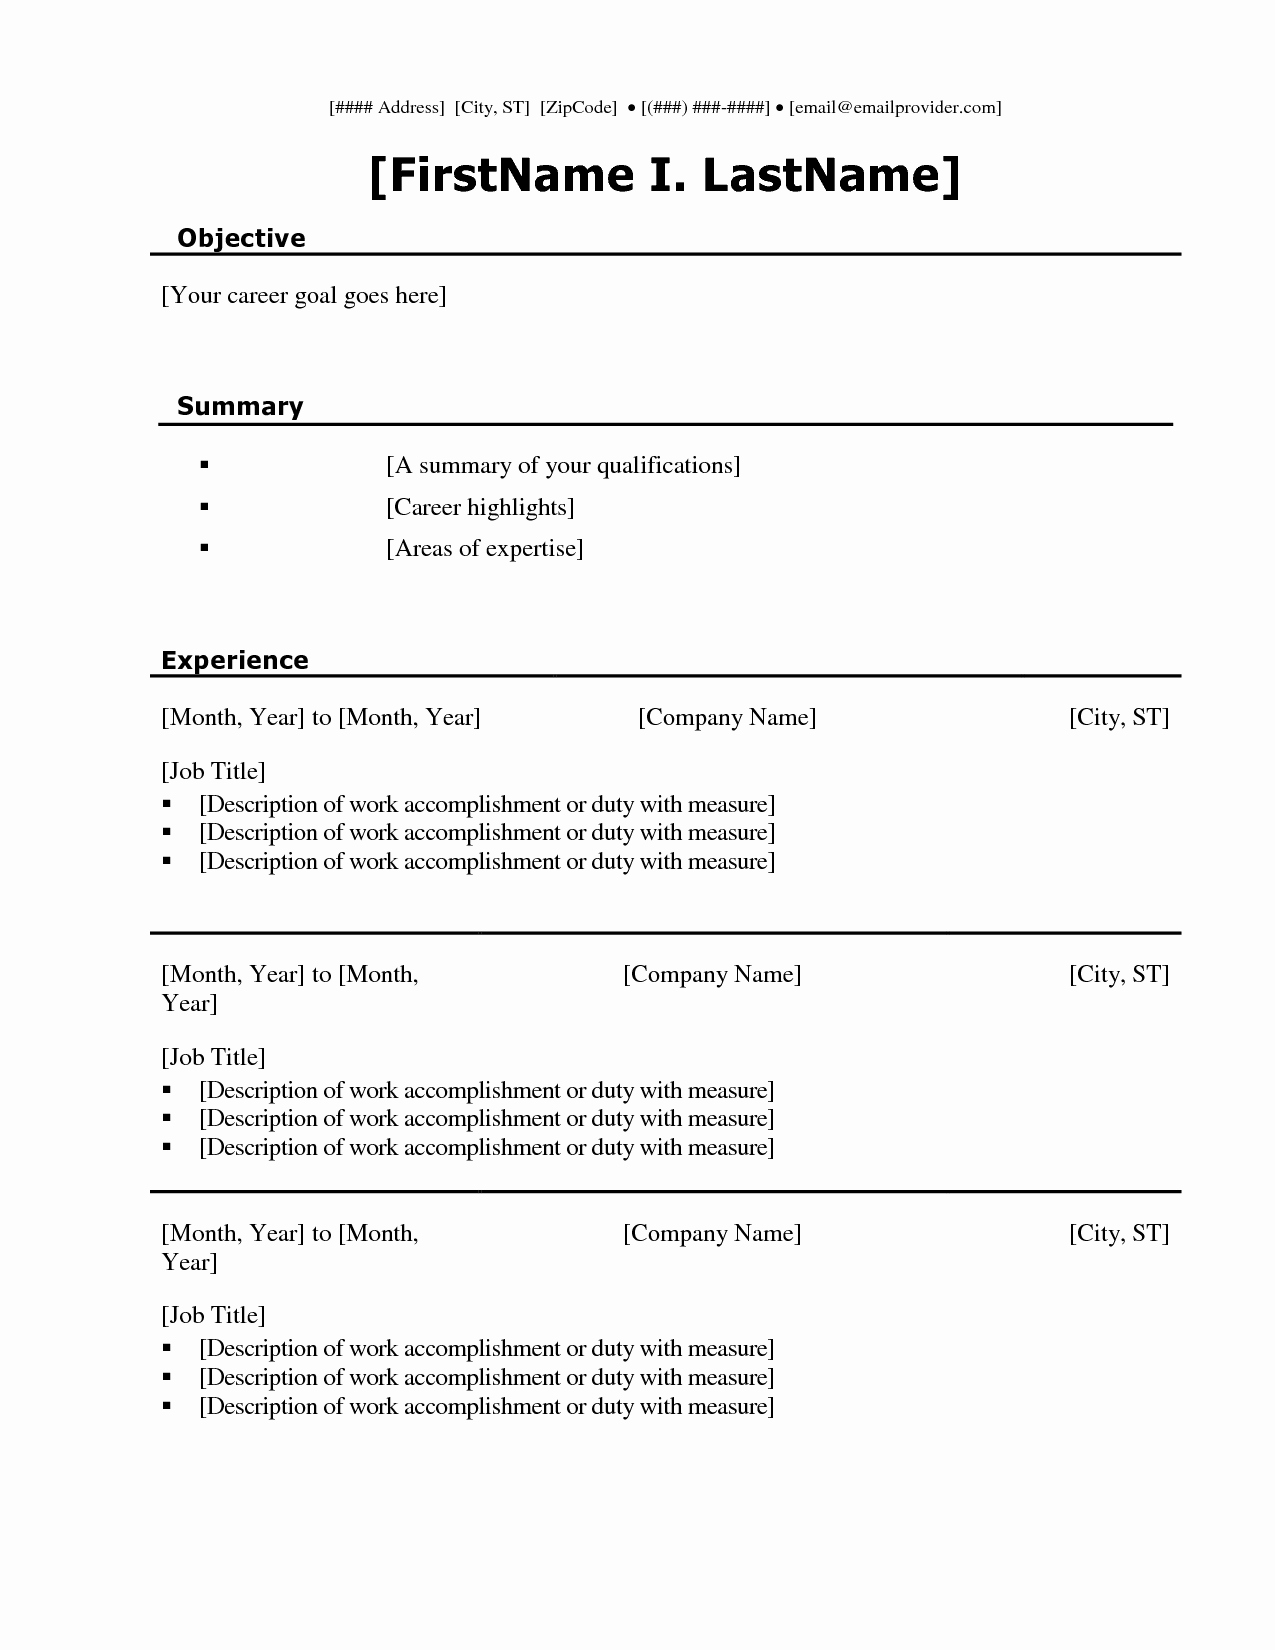 Microsoft Office Word Resume Templates Lovely Microsoft Word Resume Templates